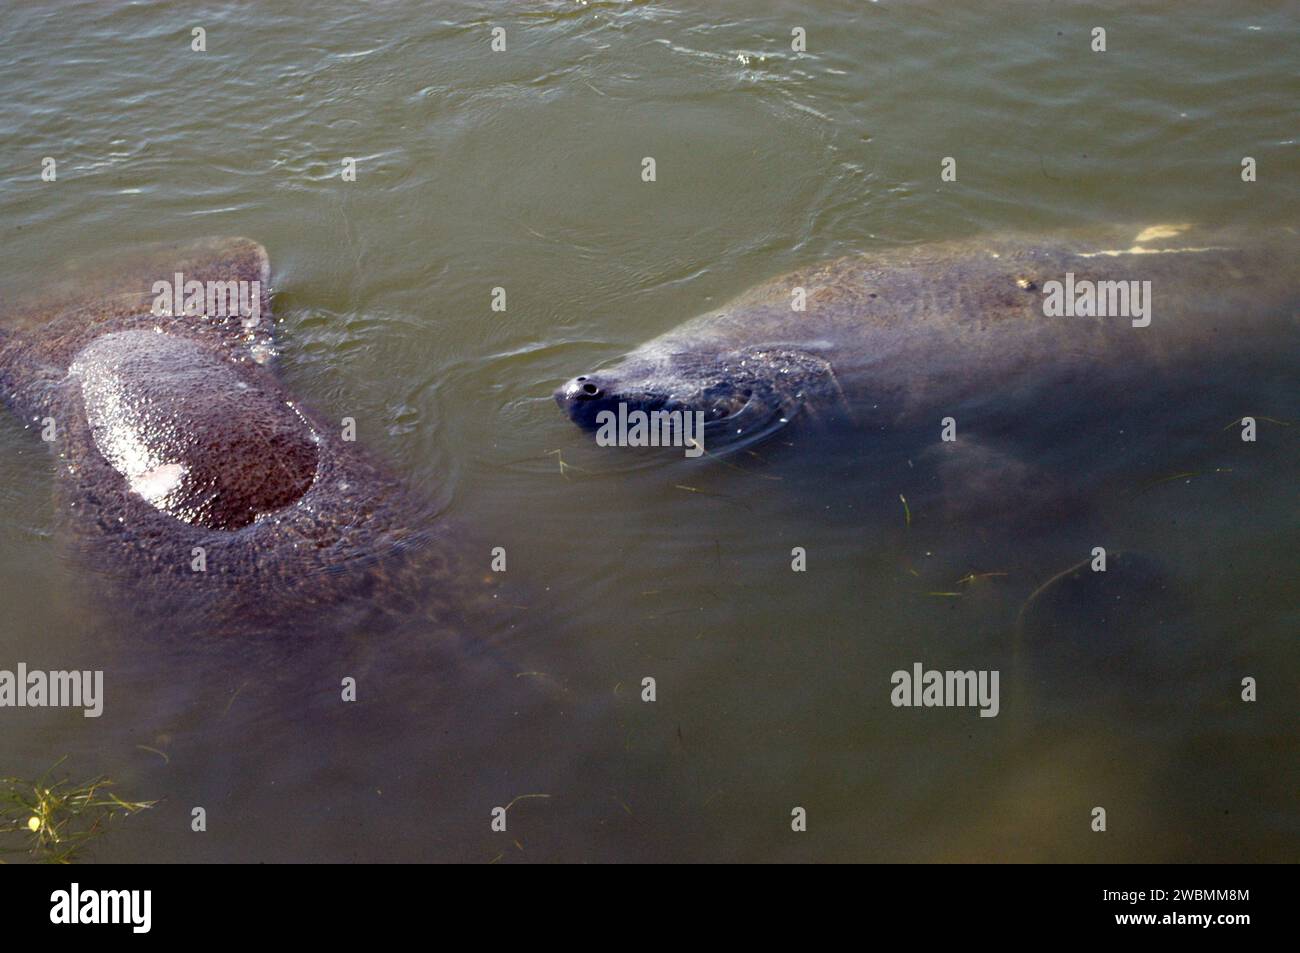 KENNEDY SPACE CENTER, FLA. - Two manatees surface in the Haulover Canal near NASA’s Kennedy Space Center. Manatees live in Florida's warm-water rivers and inland springs. The Florida manatee feeds on more than 60 varieties of grasses and plants. Manatee cows give birth about once every three years. Gestation lasts about 12 months. KSC shares a boundary with the Merritt Island National Wildlife Refuge, which encompasses 92,000 acres that are a habitat for more than 331 species of birds, 31 mammals, 117 fishes, and 65 amphibians and reptiles. Stock Photo